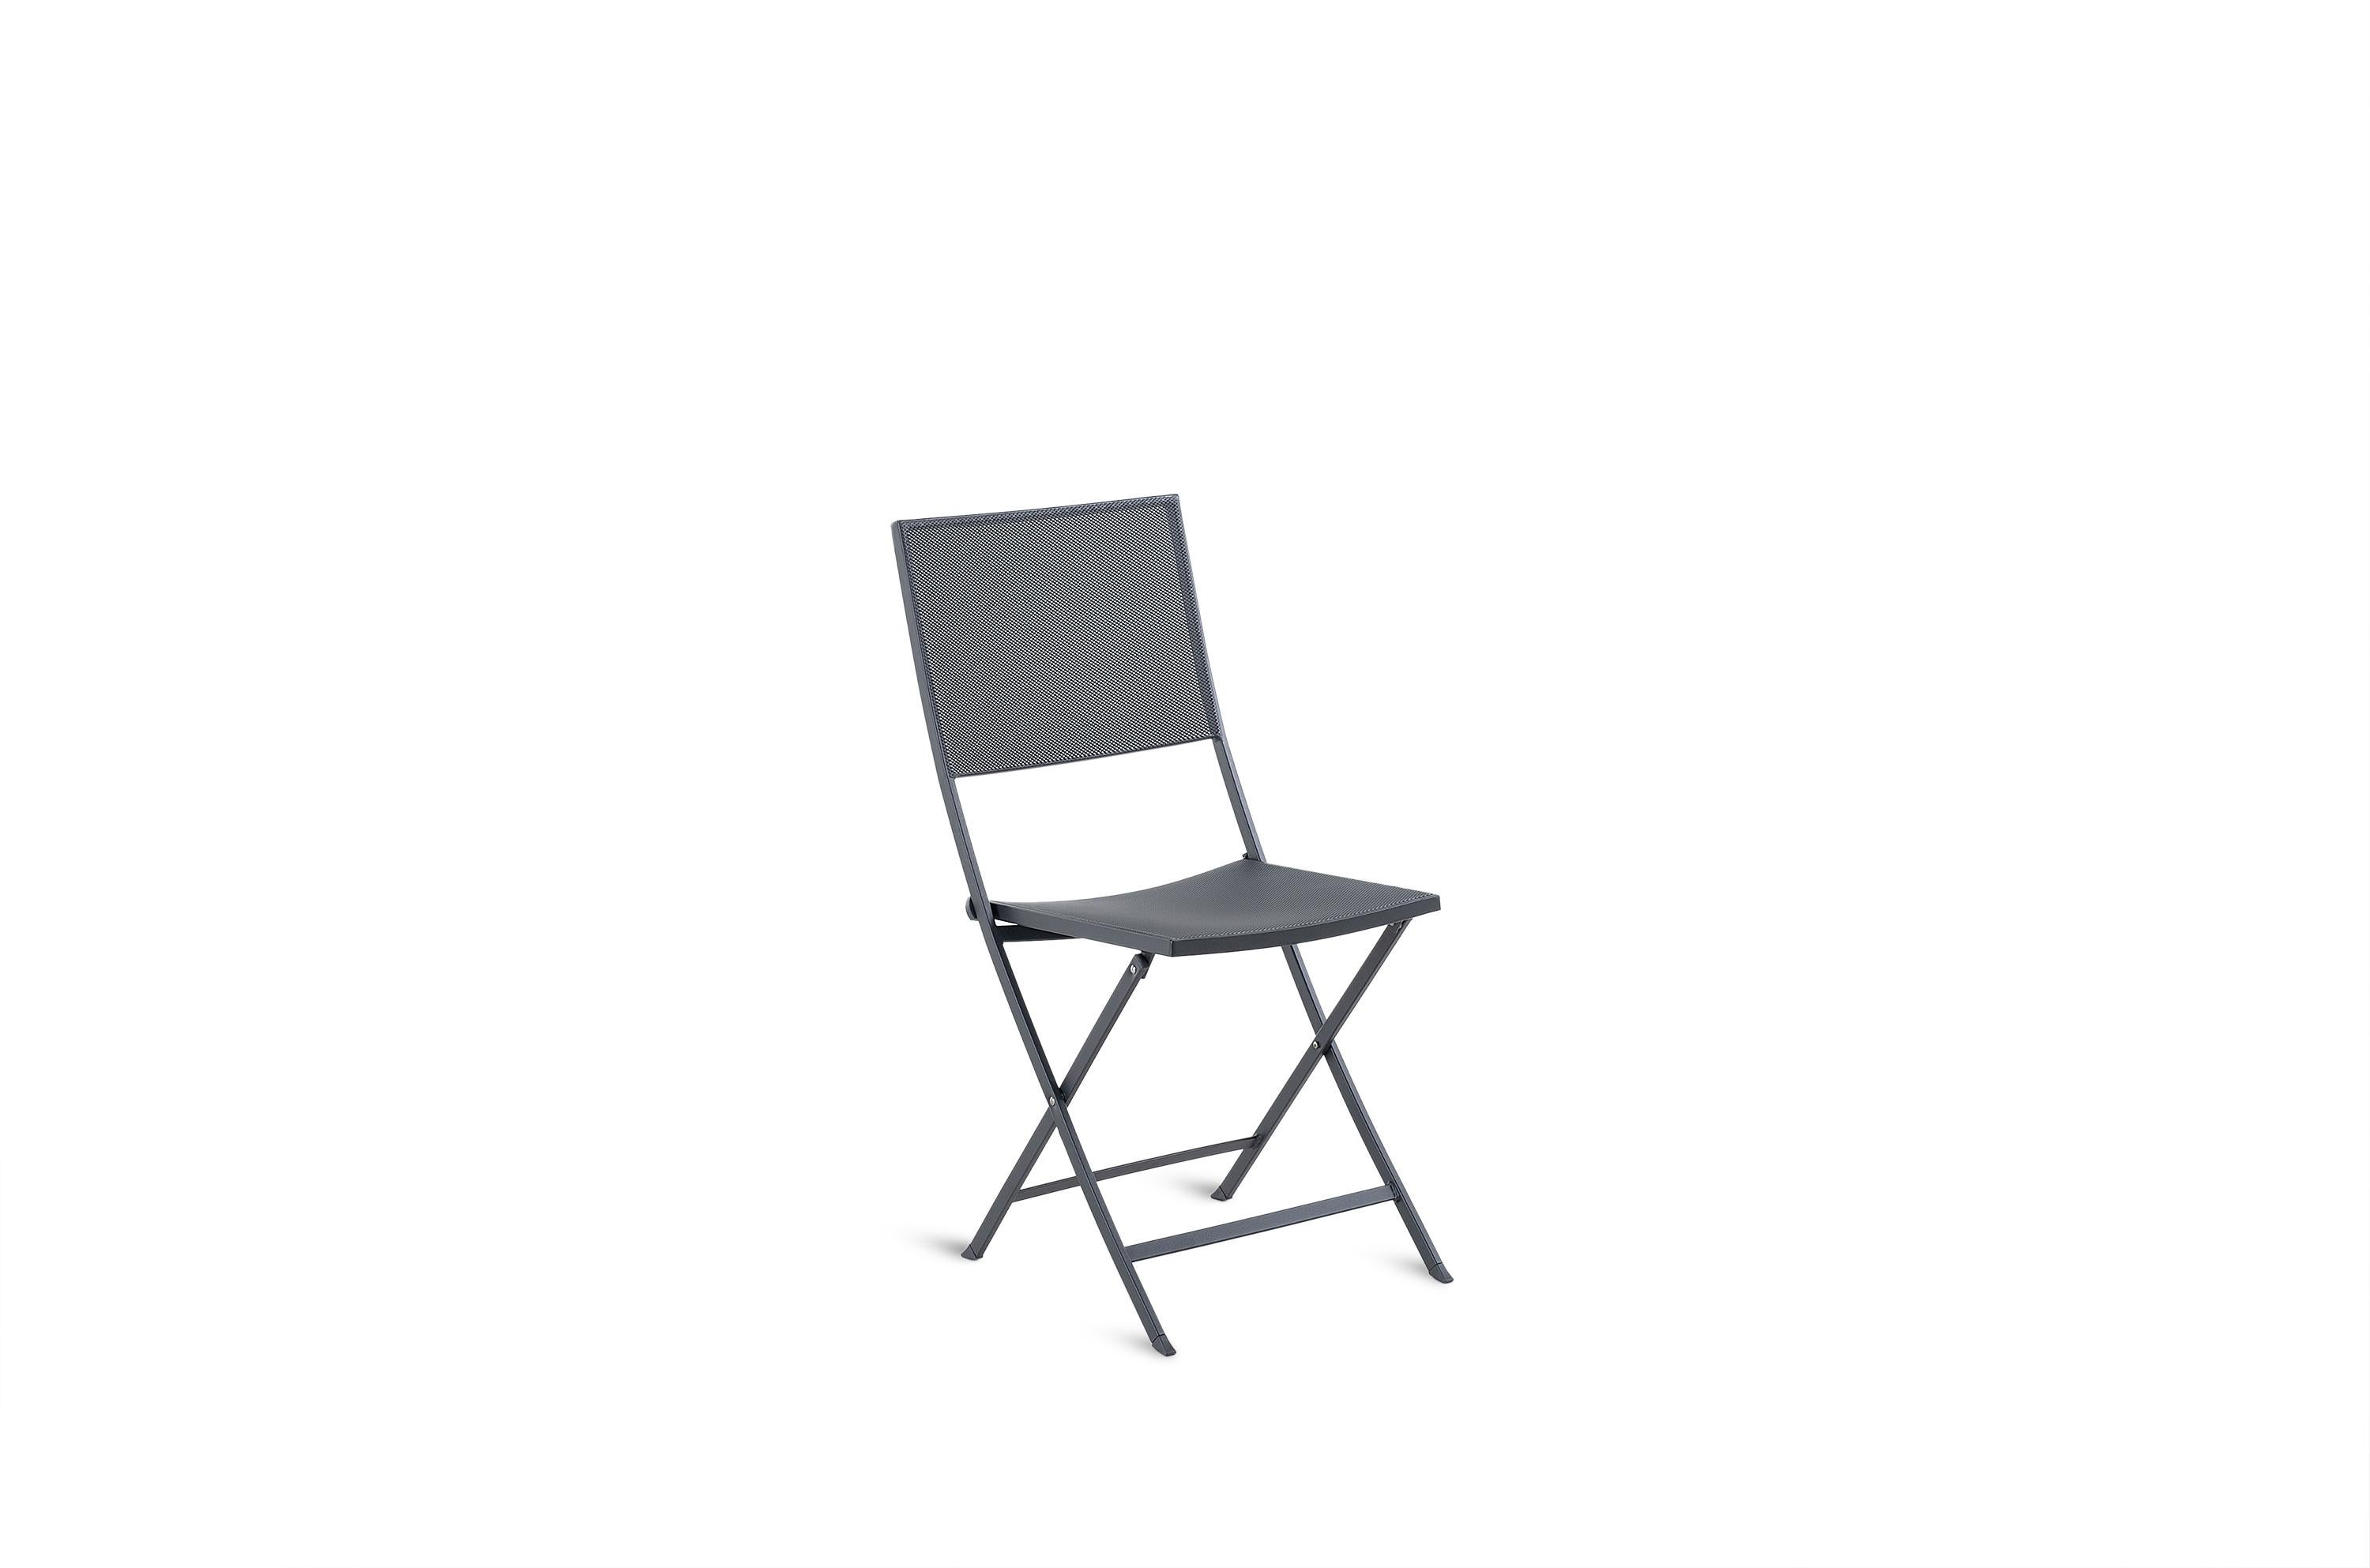 Iron Unopiu' Conrad Foldable Chairs Outdoor Collection For Sale